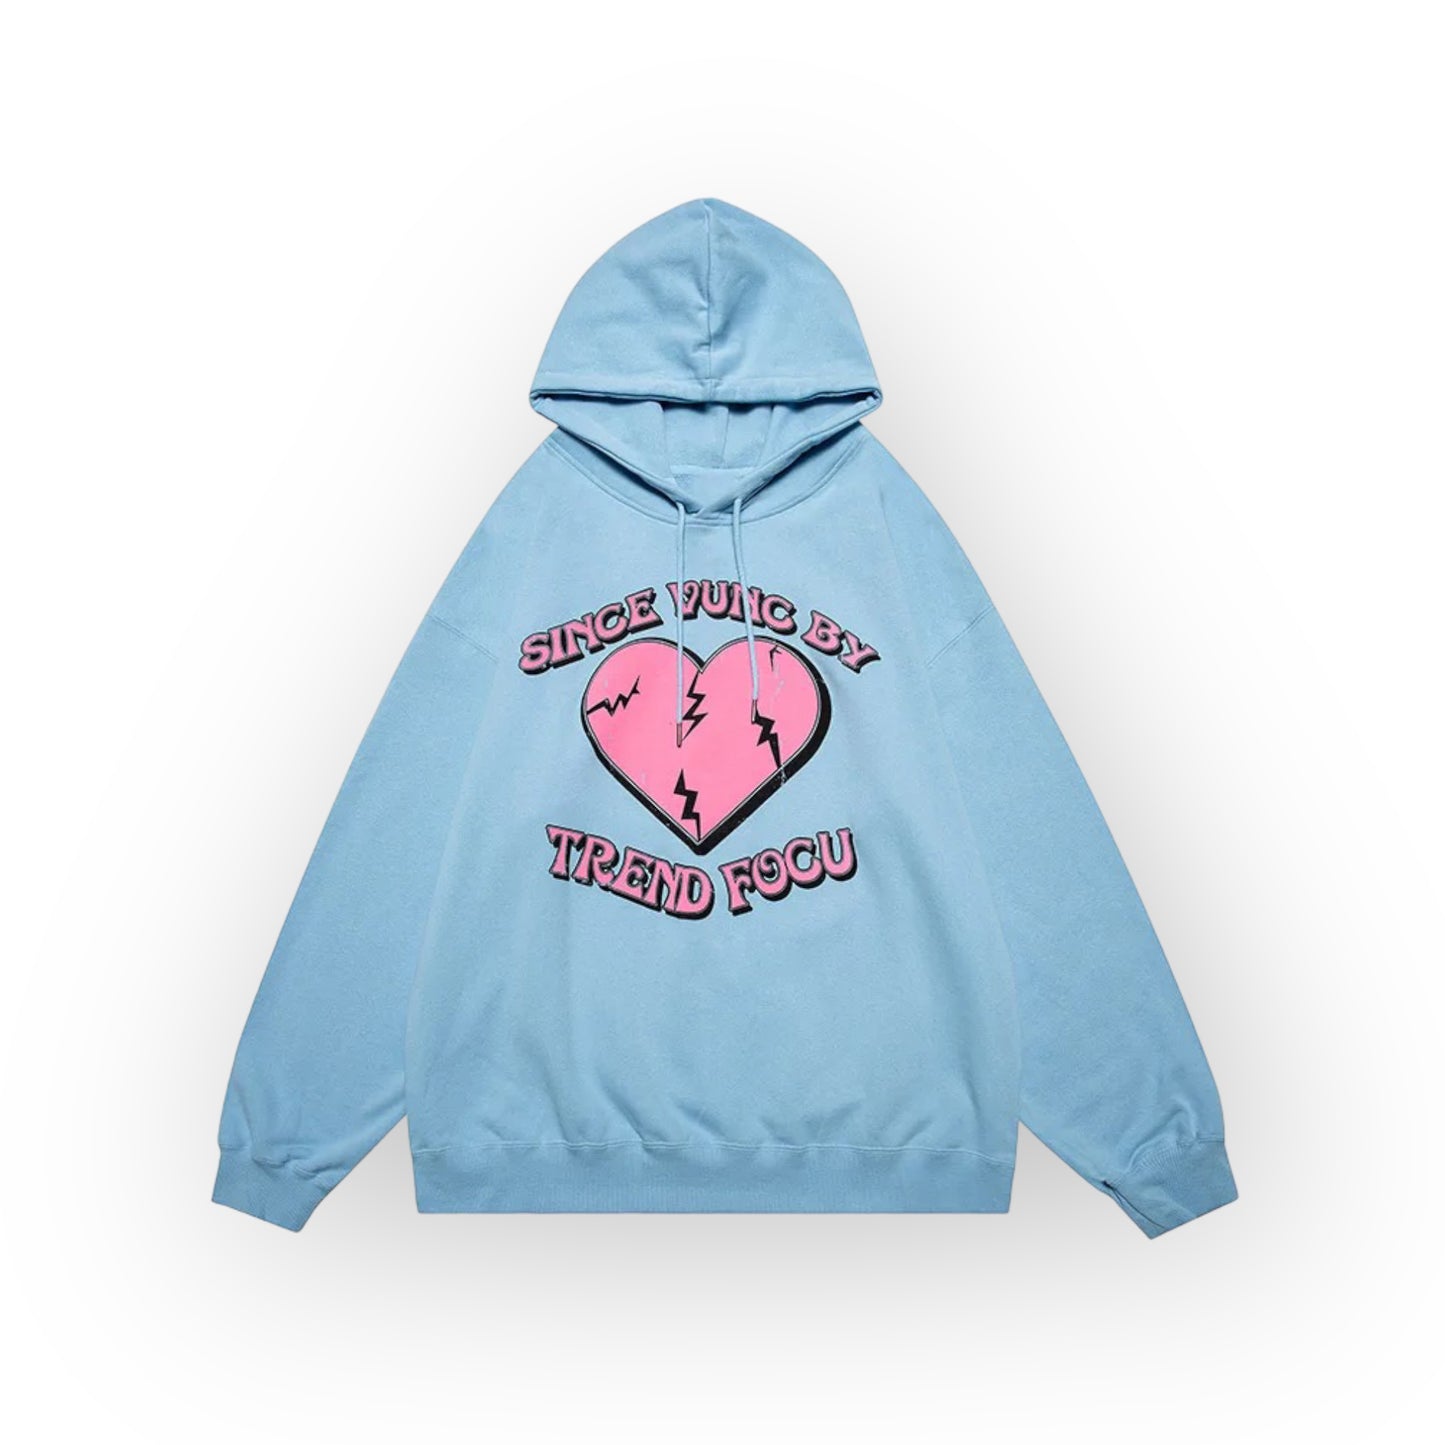 Aolamegs Cracked Heart Graphic Letter Print Hoodies